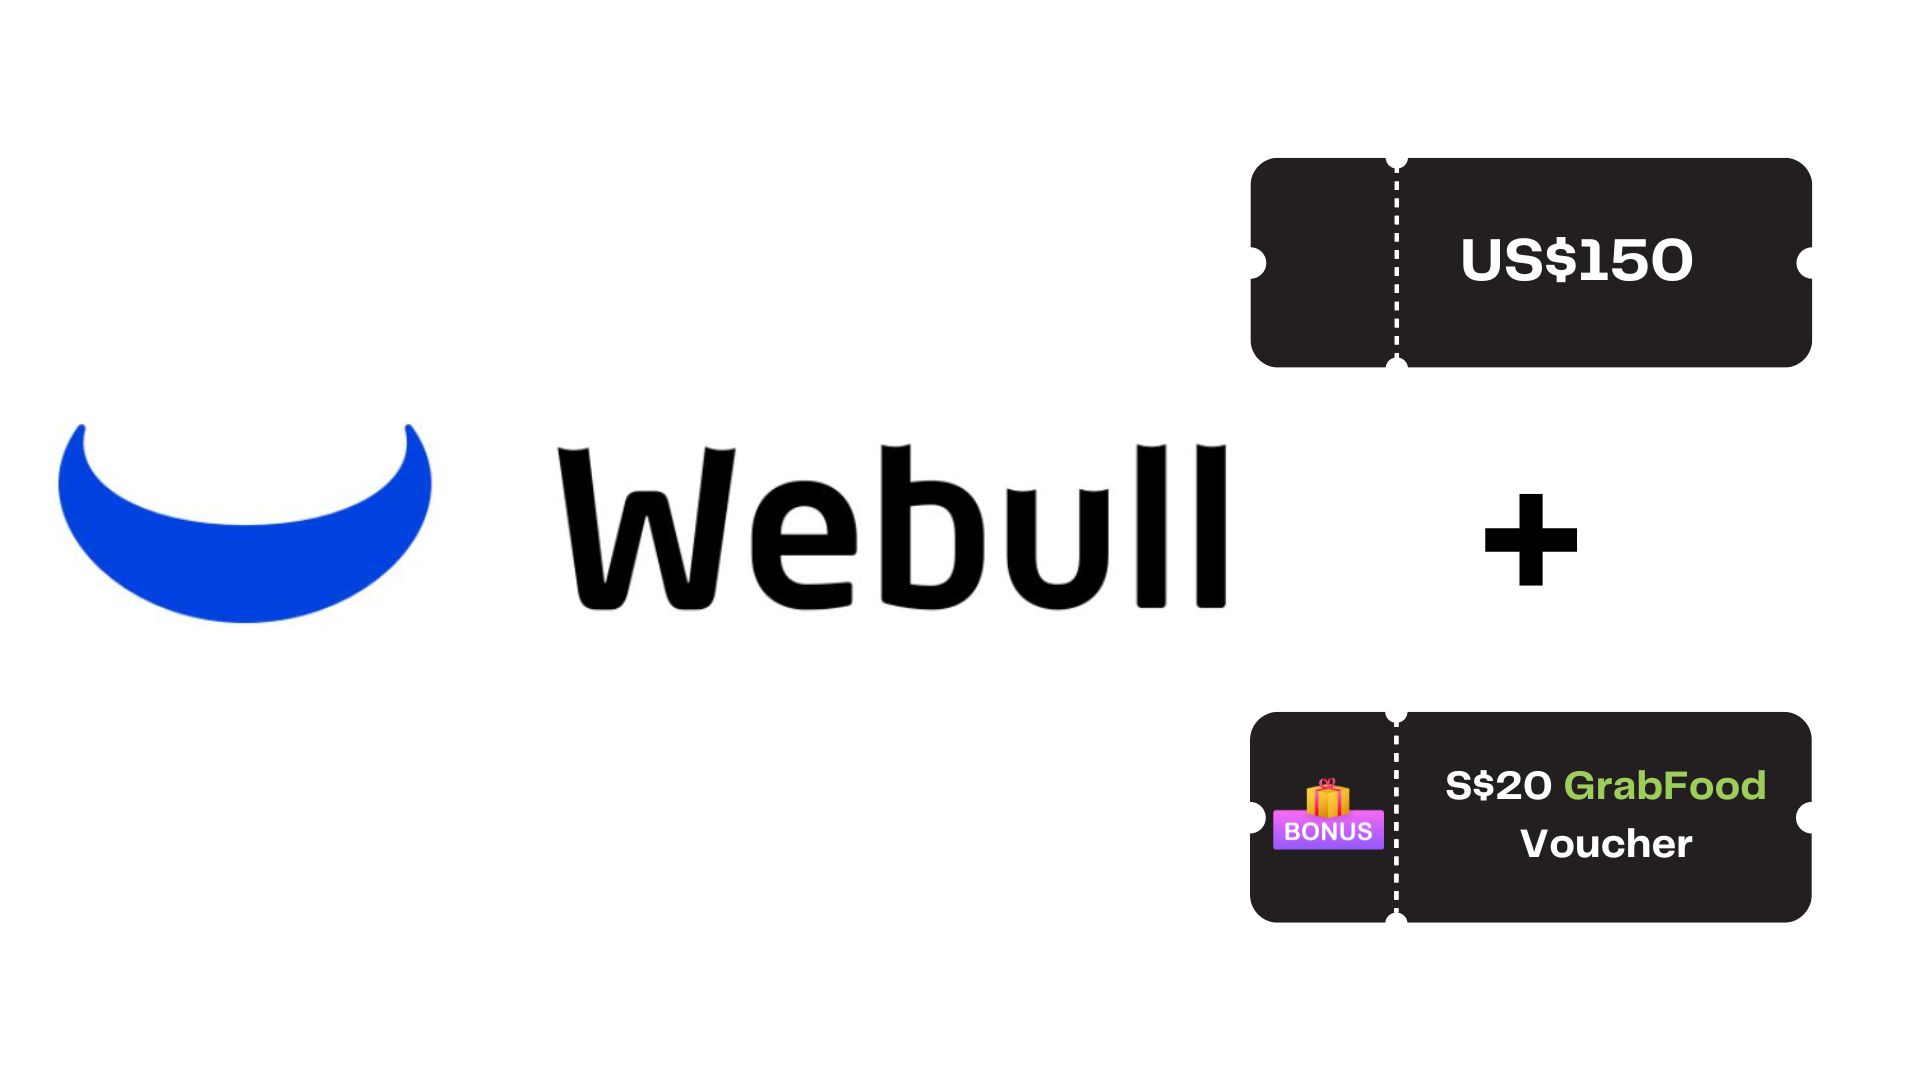 Webull Referral Code Singapore: Earn US$150 + exclusive S$20 GrabFood Voucher